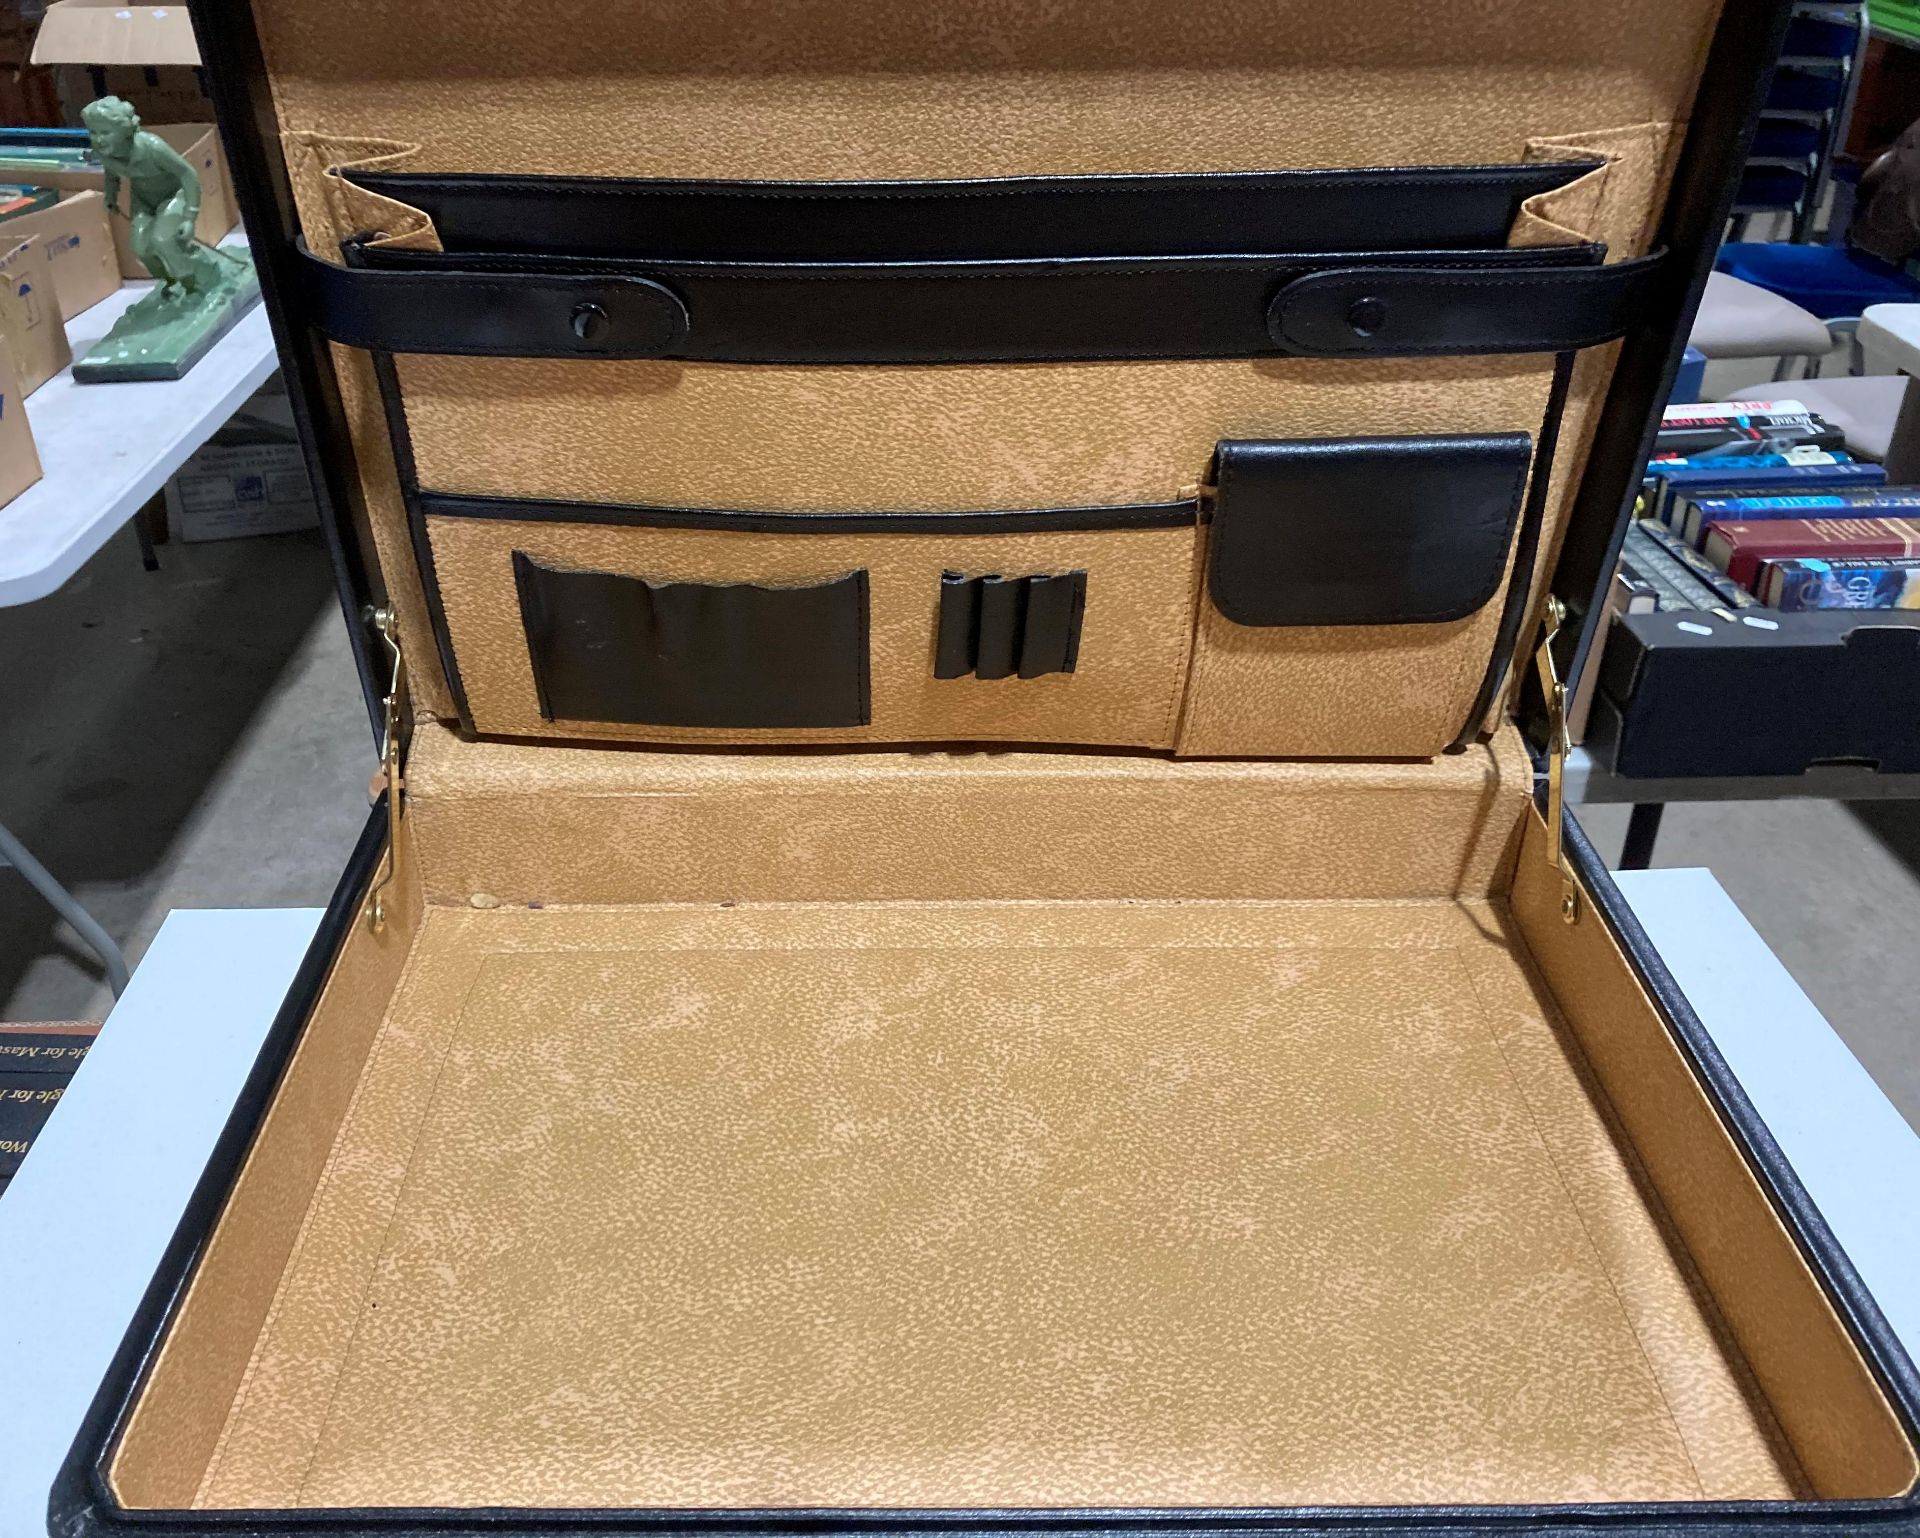 Two briefcases by Samsonite and Antler (both unlocked) (Saleroom location: S3 Counter) - Image 2 of 3